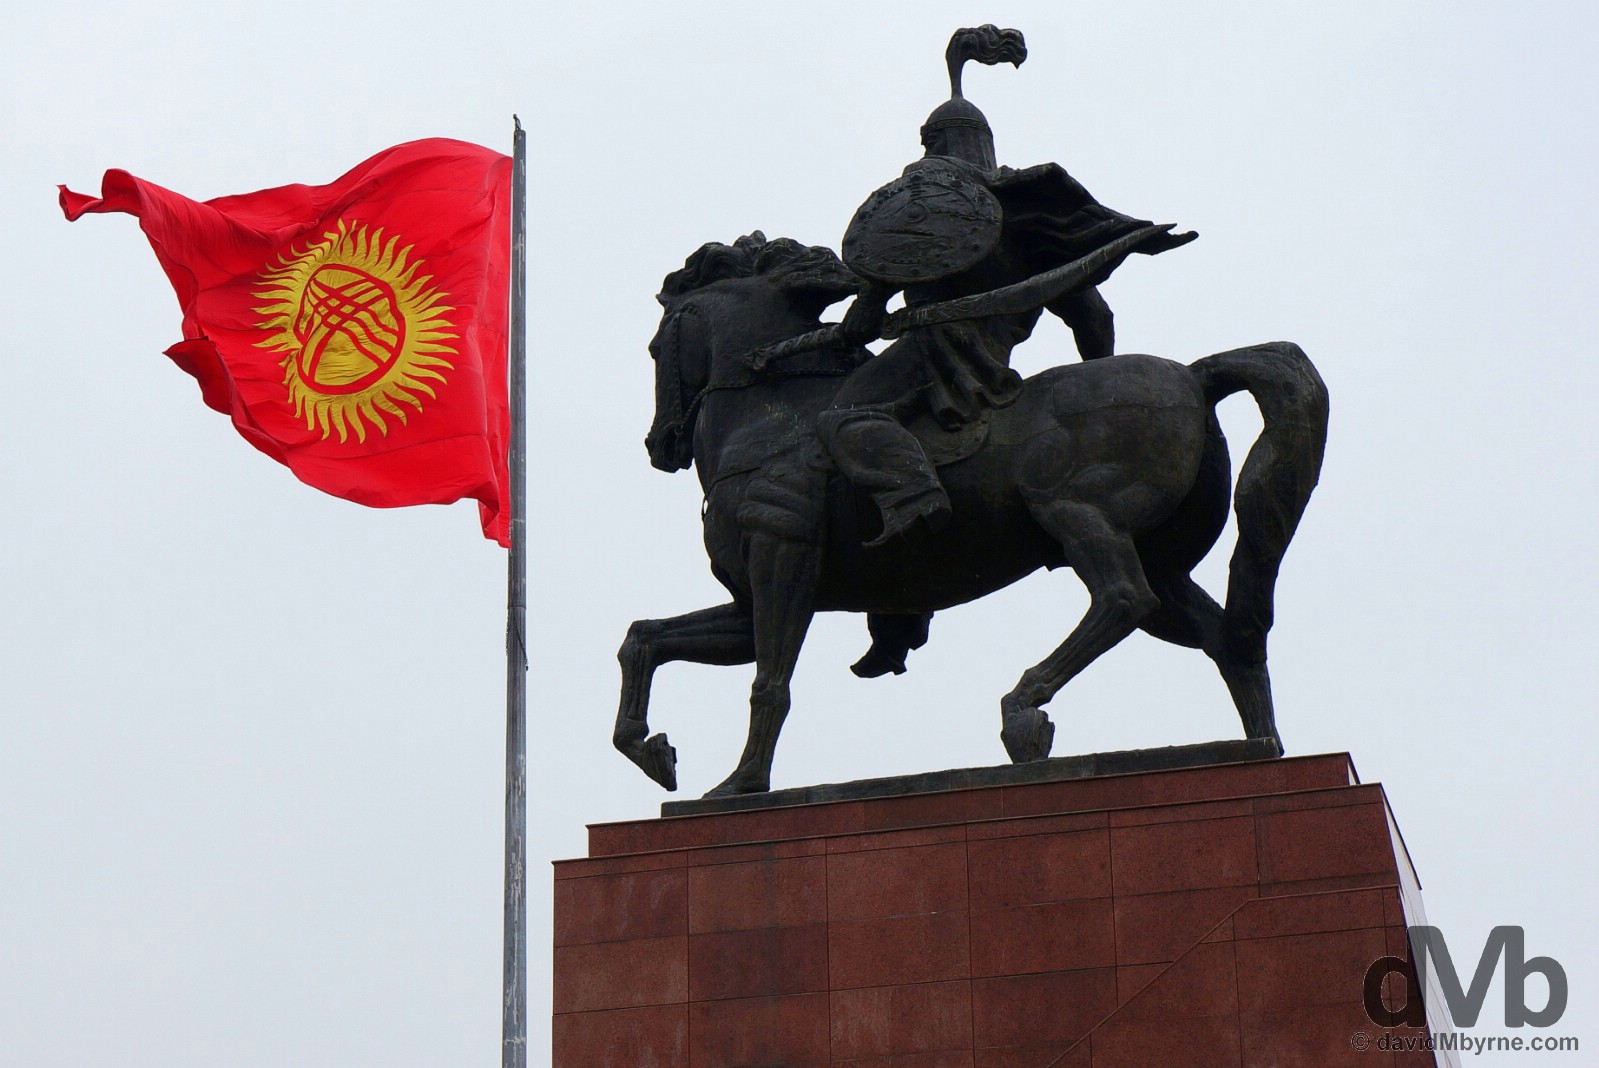 The Manas statue and Kyrgyz flag in Ala-Too Square, central Bishkek. February 25, 2005. 